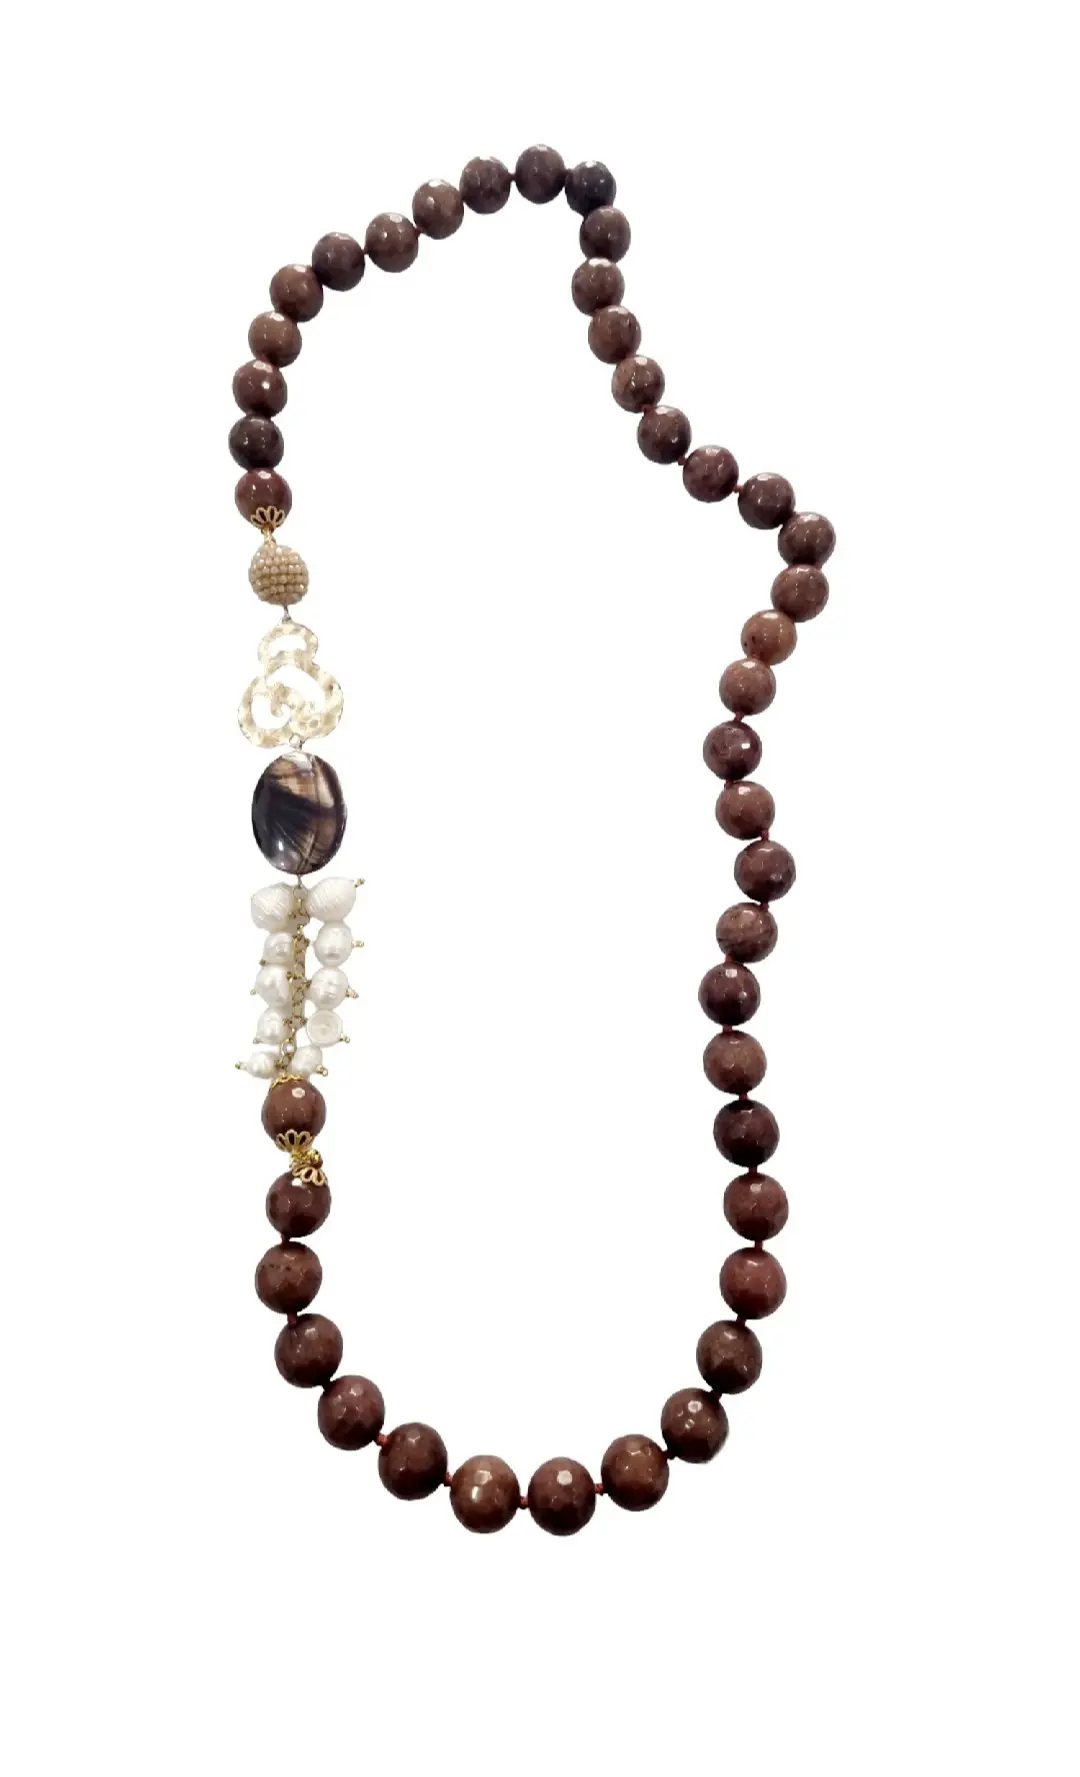 Necklace made with Brown Agate, River Pearls, Mother of Pearl, Brass and crystals – Length 78cm